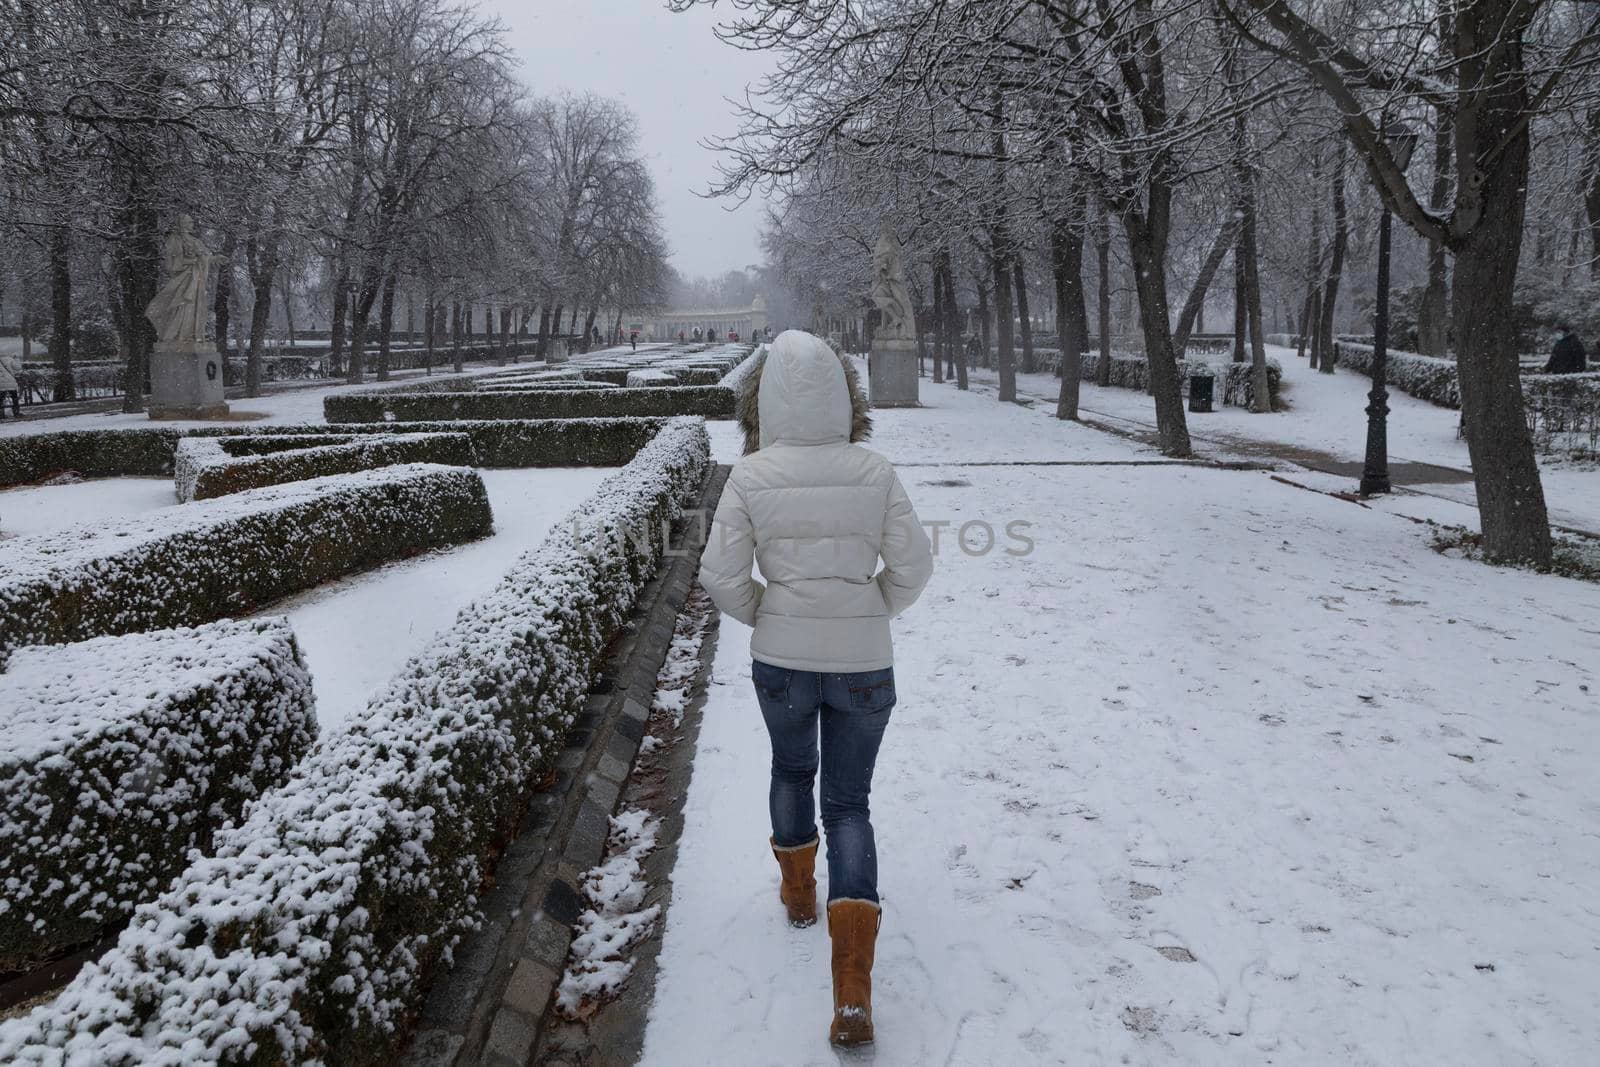 Madrid, Spain - January 07, 2021: A young girl enjoys a walk through the Buen Retiro park in Madrid, in the middle of a snowy day, due to a wave of polar cold.